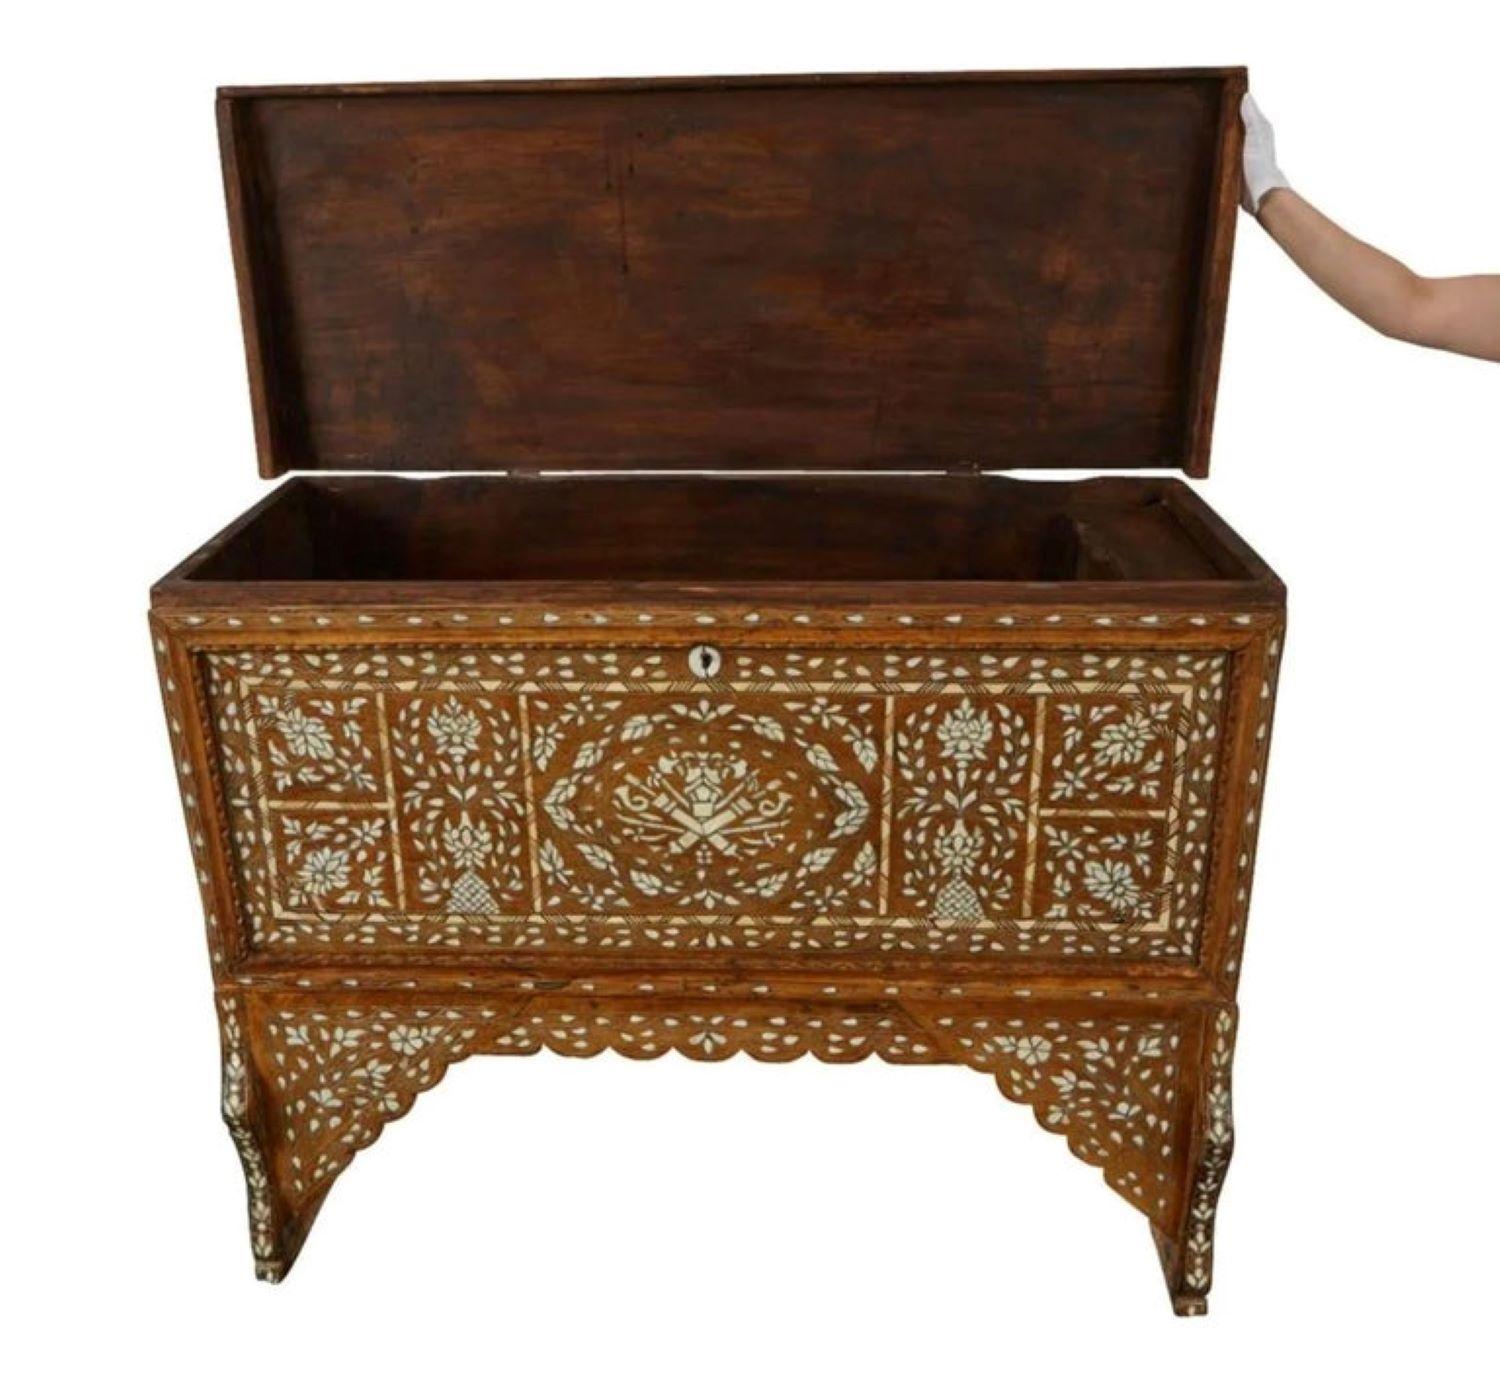 Syrian mother of pearl inlaid wooden wedding or dowry chest. The trunk is profusely inlaid with intricate geometric and floral designs in mother of pearl with the intarsia method. The lid lifts to reveal two small compartments within a larger